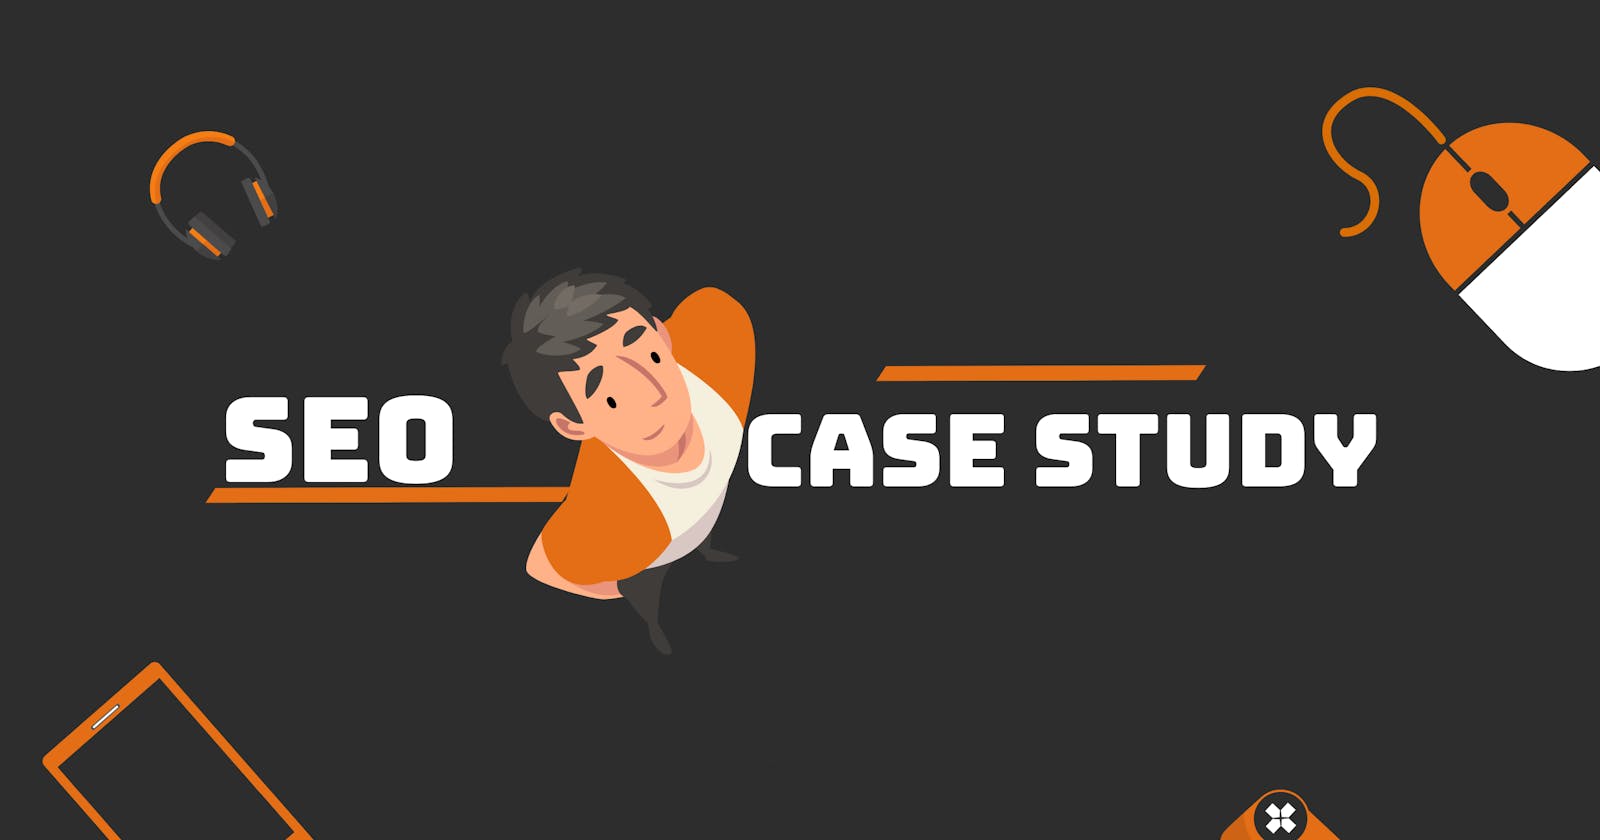 Case Study for SEO